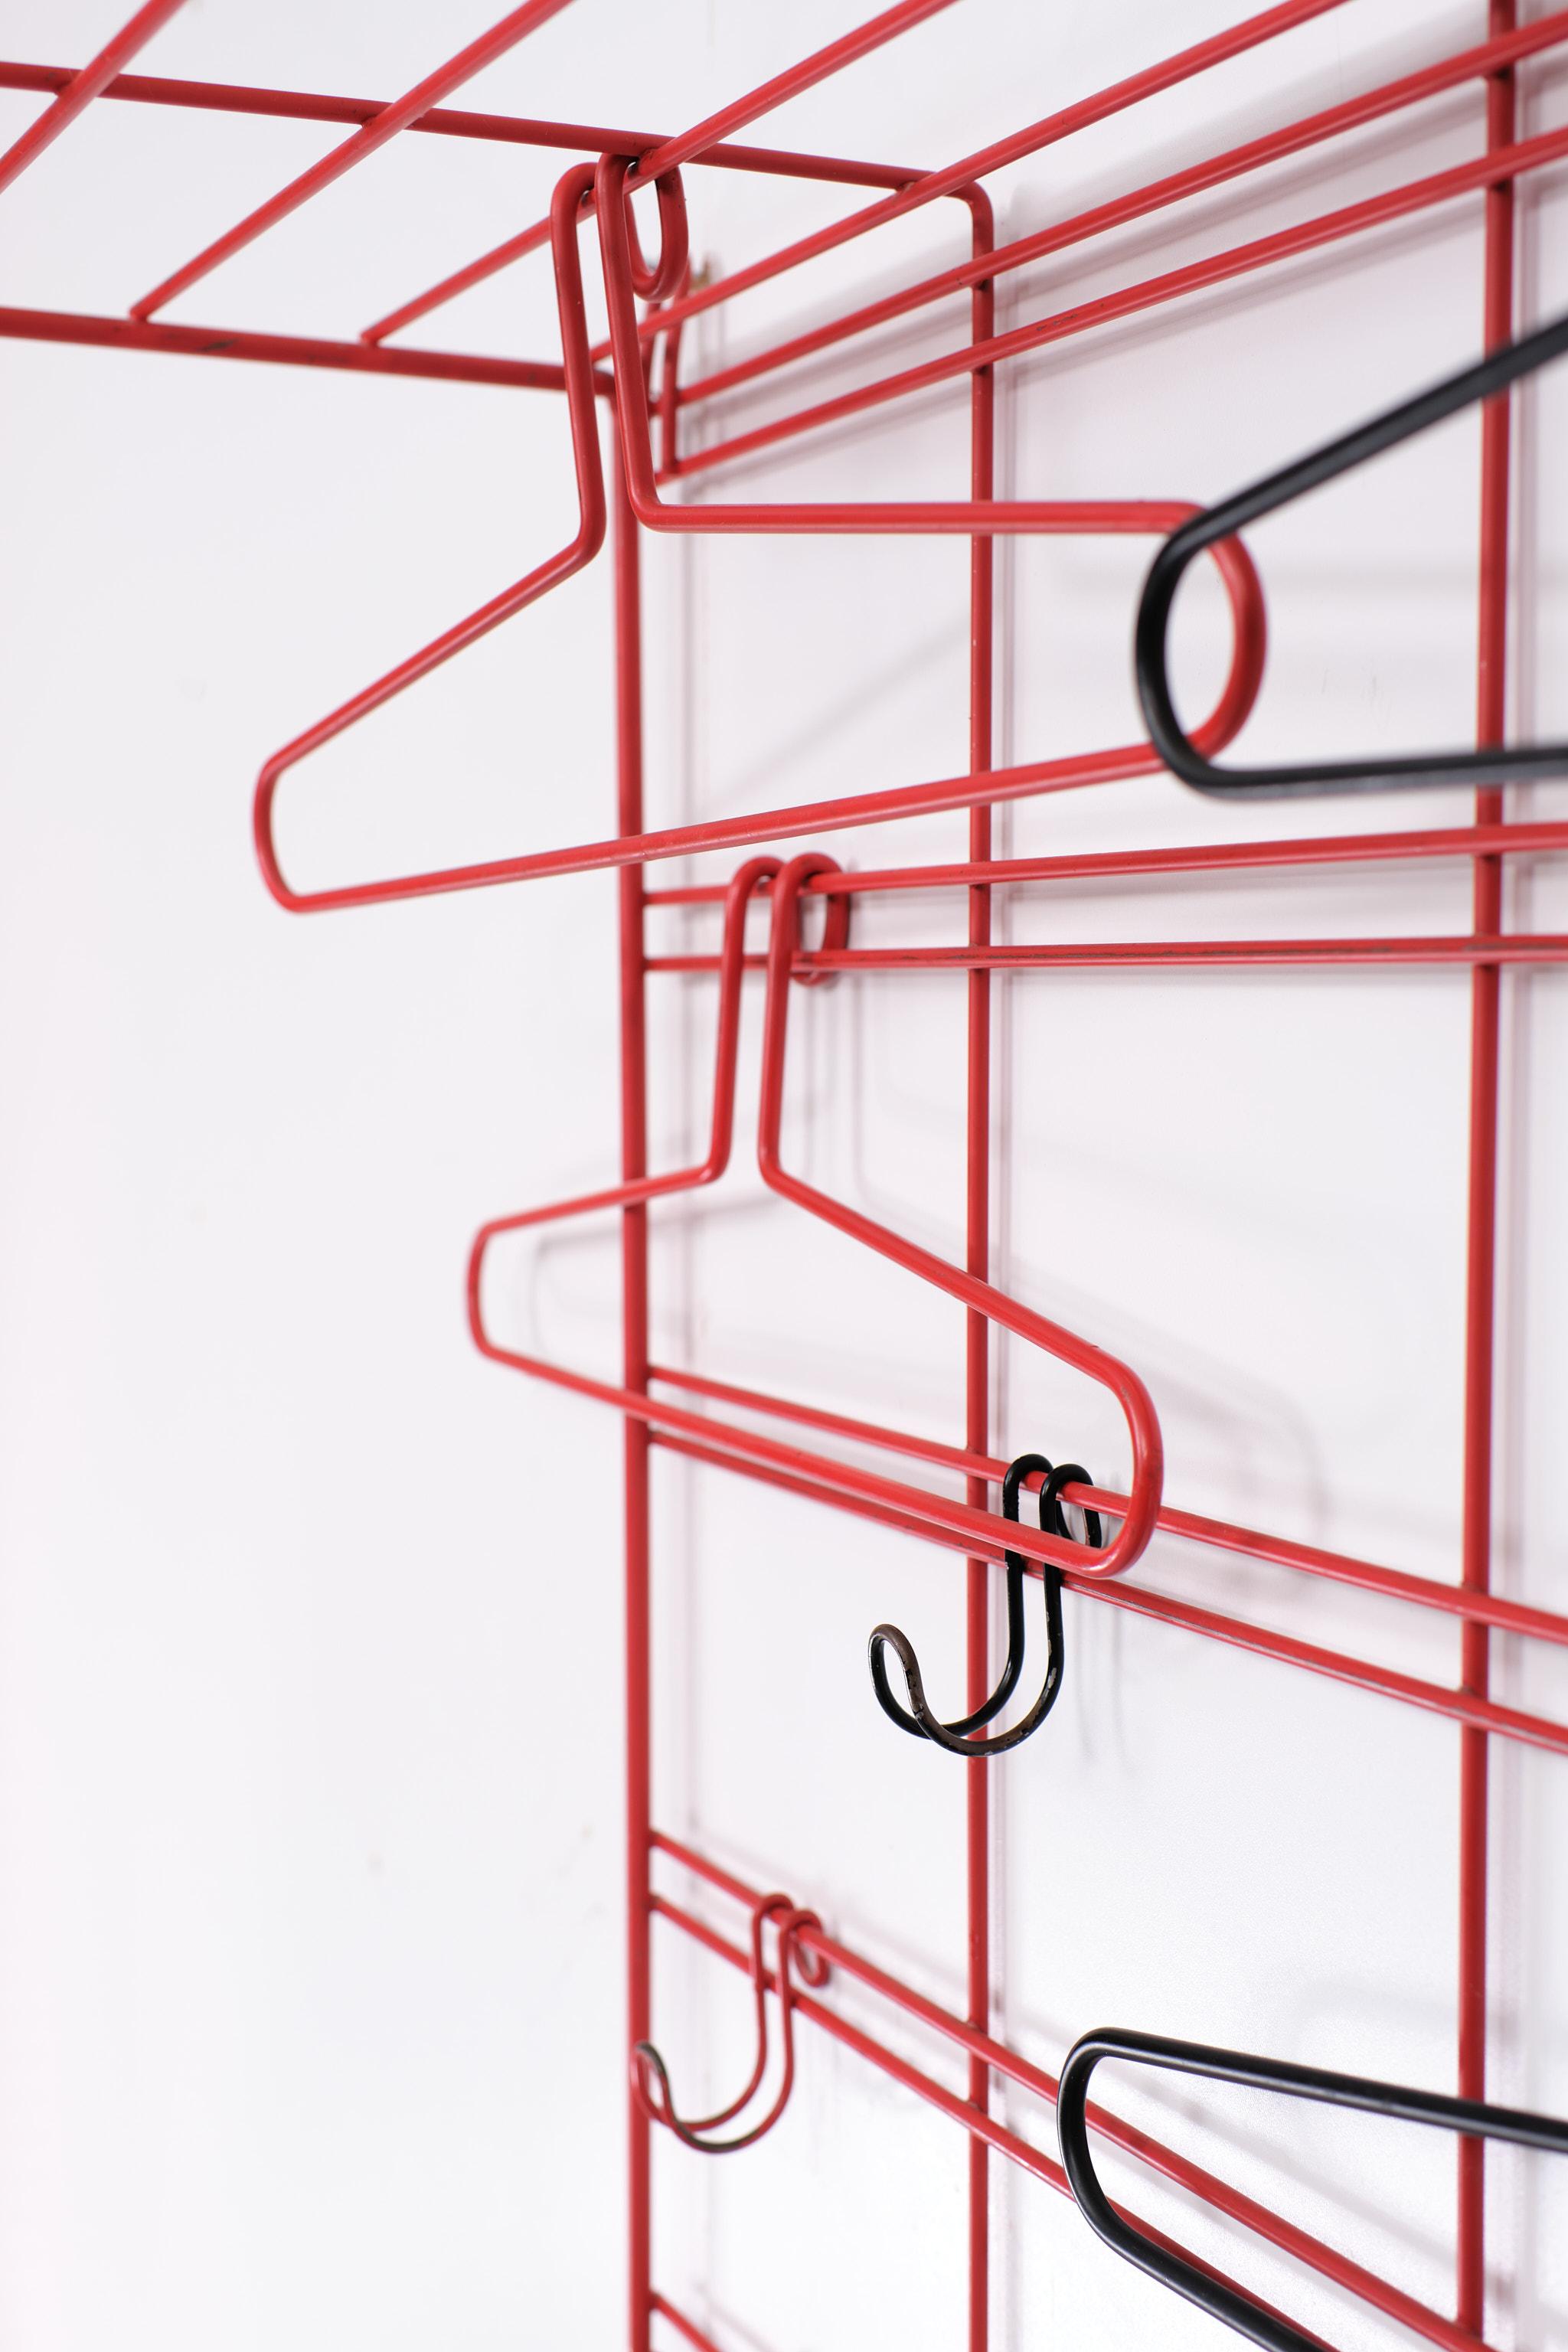 Mid-20th Century Hanging coatrack attributed to  Coen de Vries for Devo 1950s Holland  For Sale